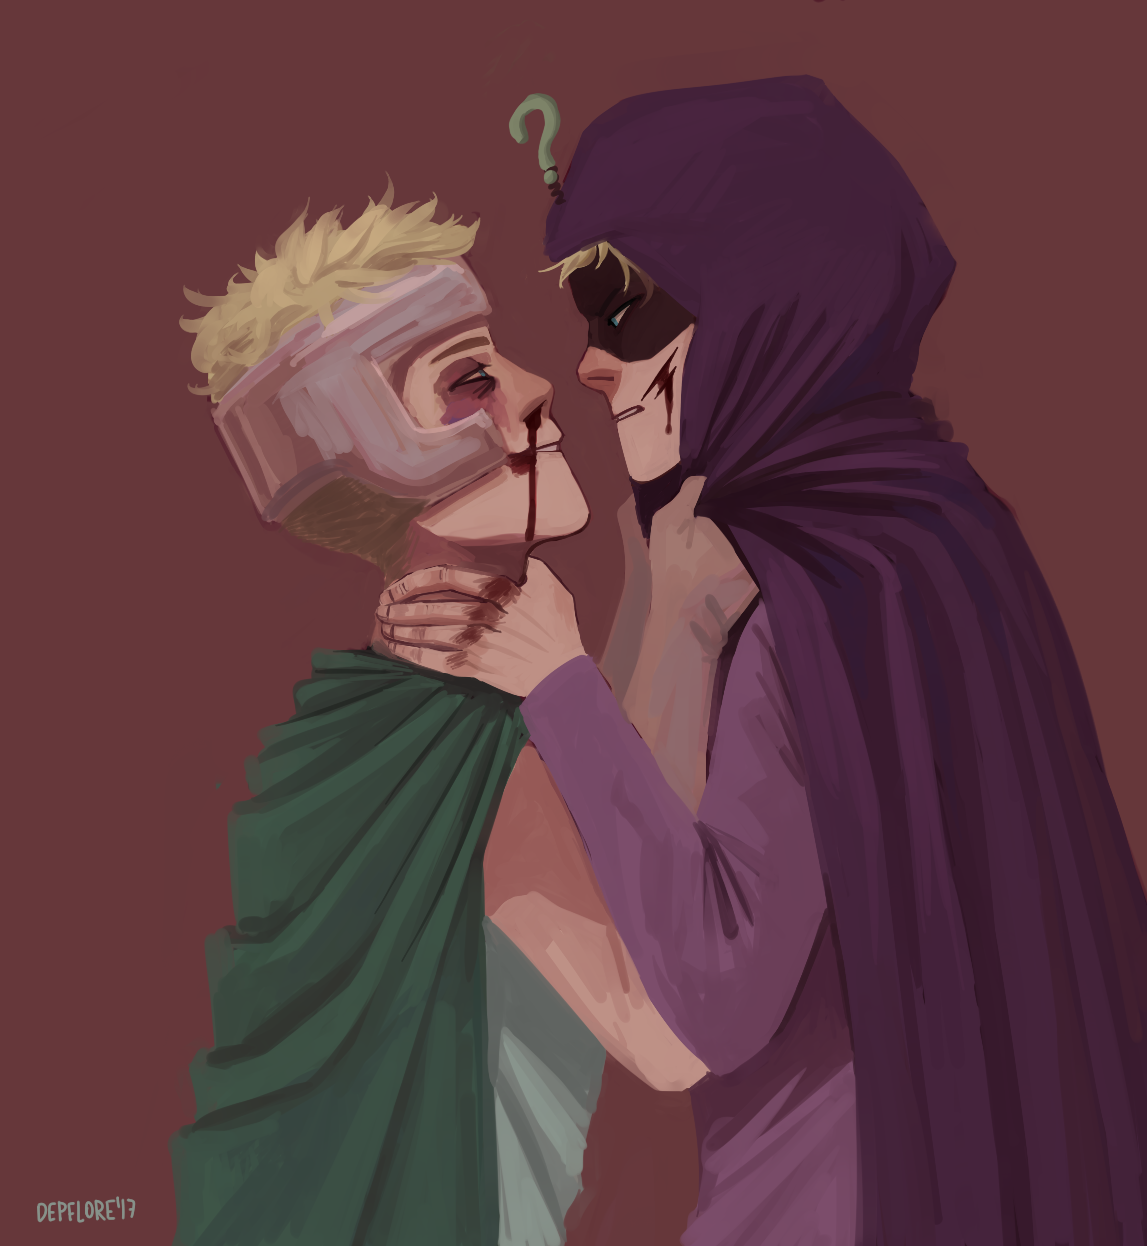 95769991. It's only a good ship because of the Mysterion x Professor C...